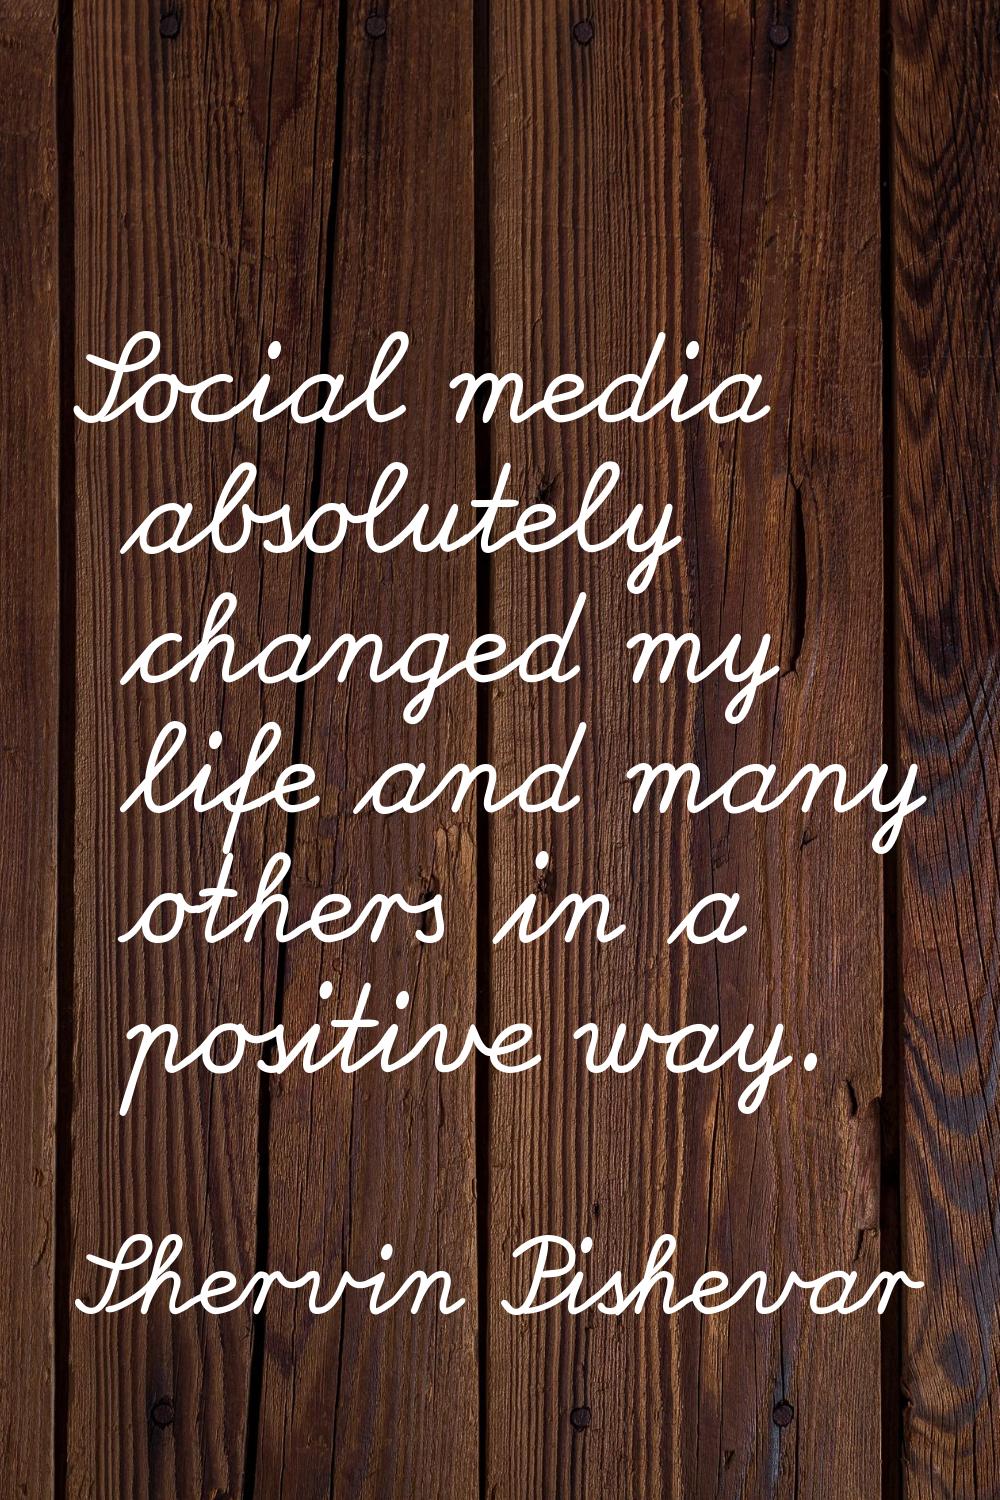 Social media absolutely changed my life and many others in a positive way.